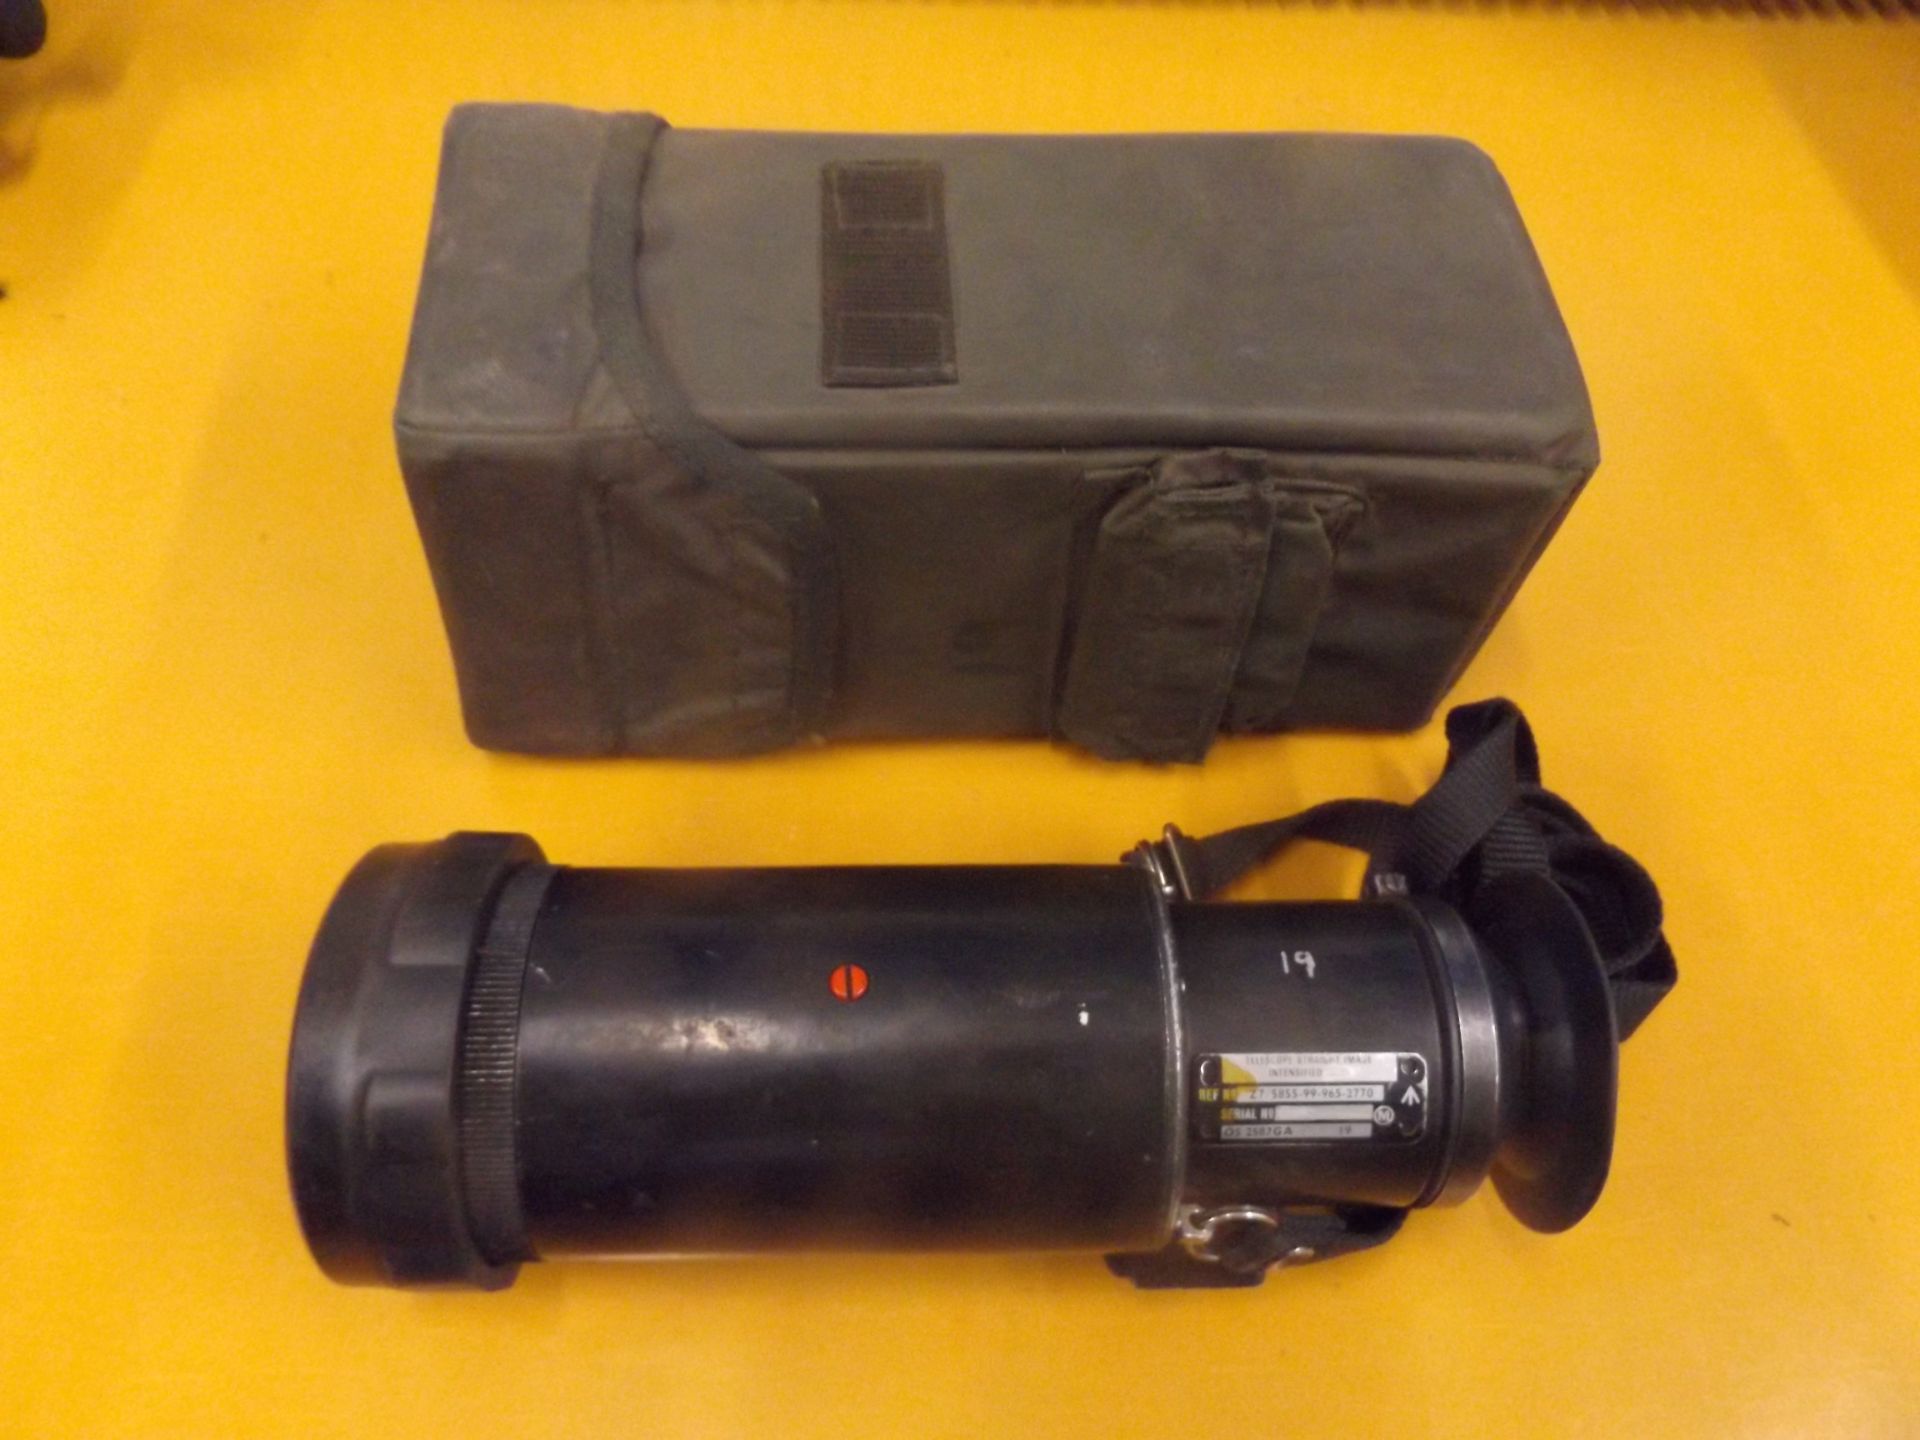 Telescope Straight Image Intensified L6A1 Scope - British Military Night Vision Pocket Scope